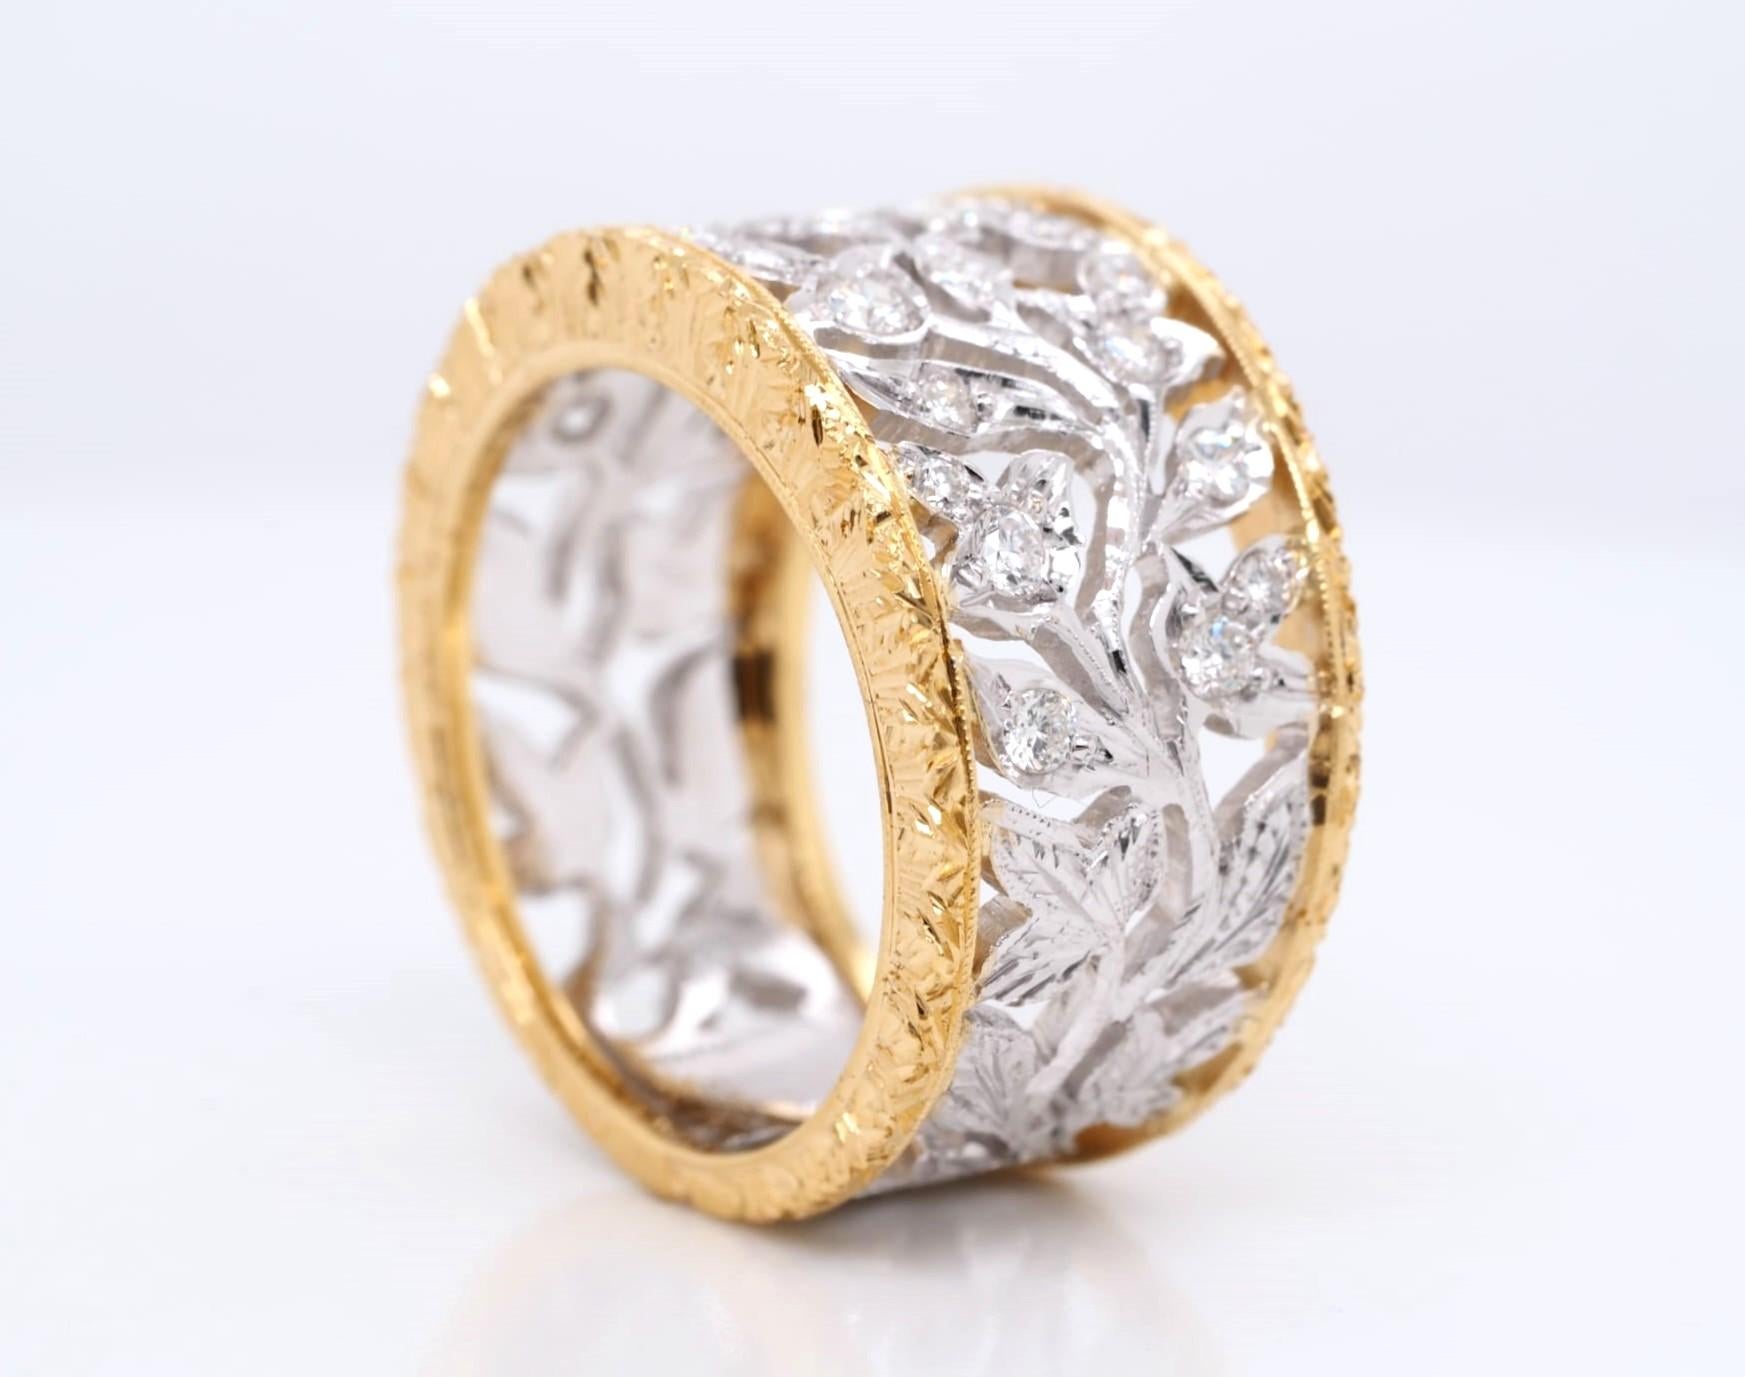 This beautiful vintage 18K yellow and white gold band ring features 24 round cut diamonds with a total carat weight of 0.60 ct. The diamonds are set in a prong setting style and are graded as very slightly included (VS1) in clarity and G in color